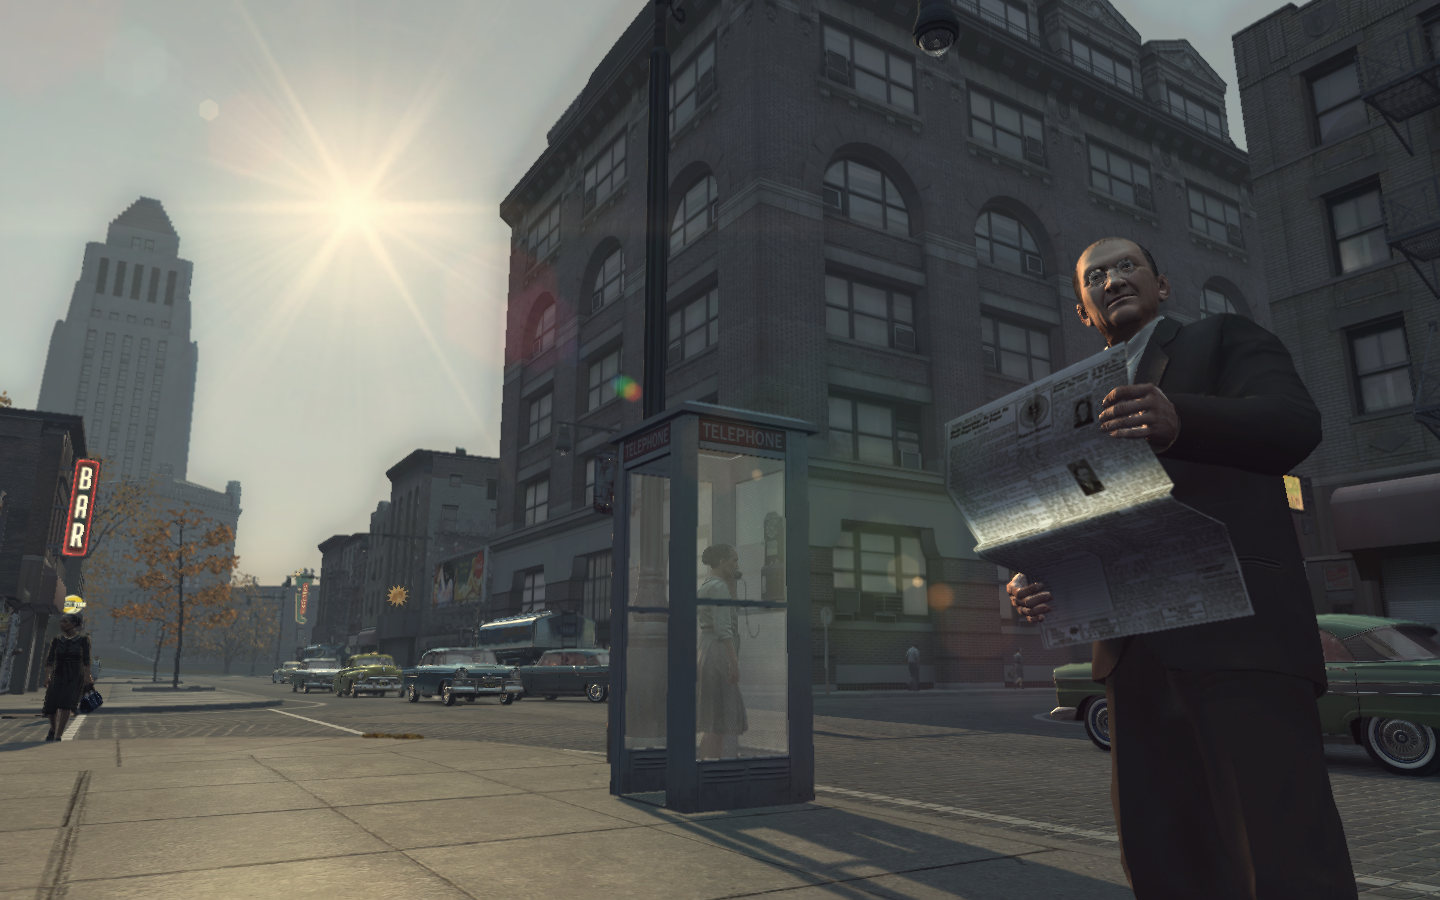 Top mods at Mafia 2 - Mods and community